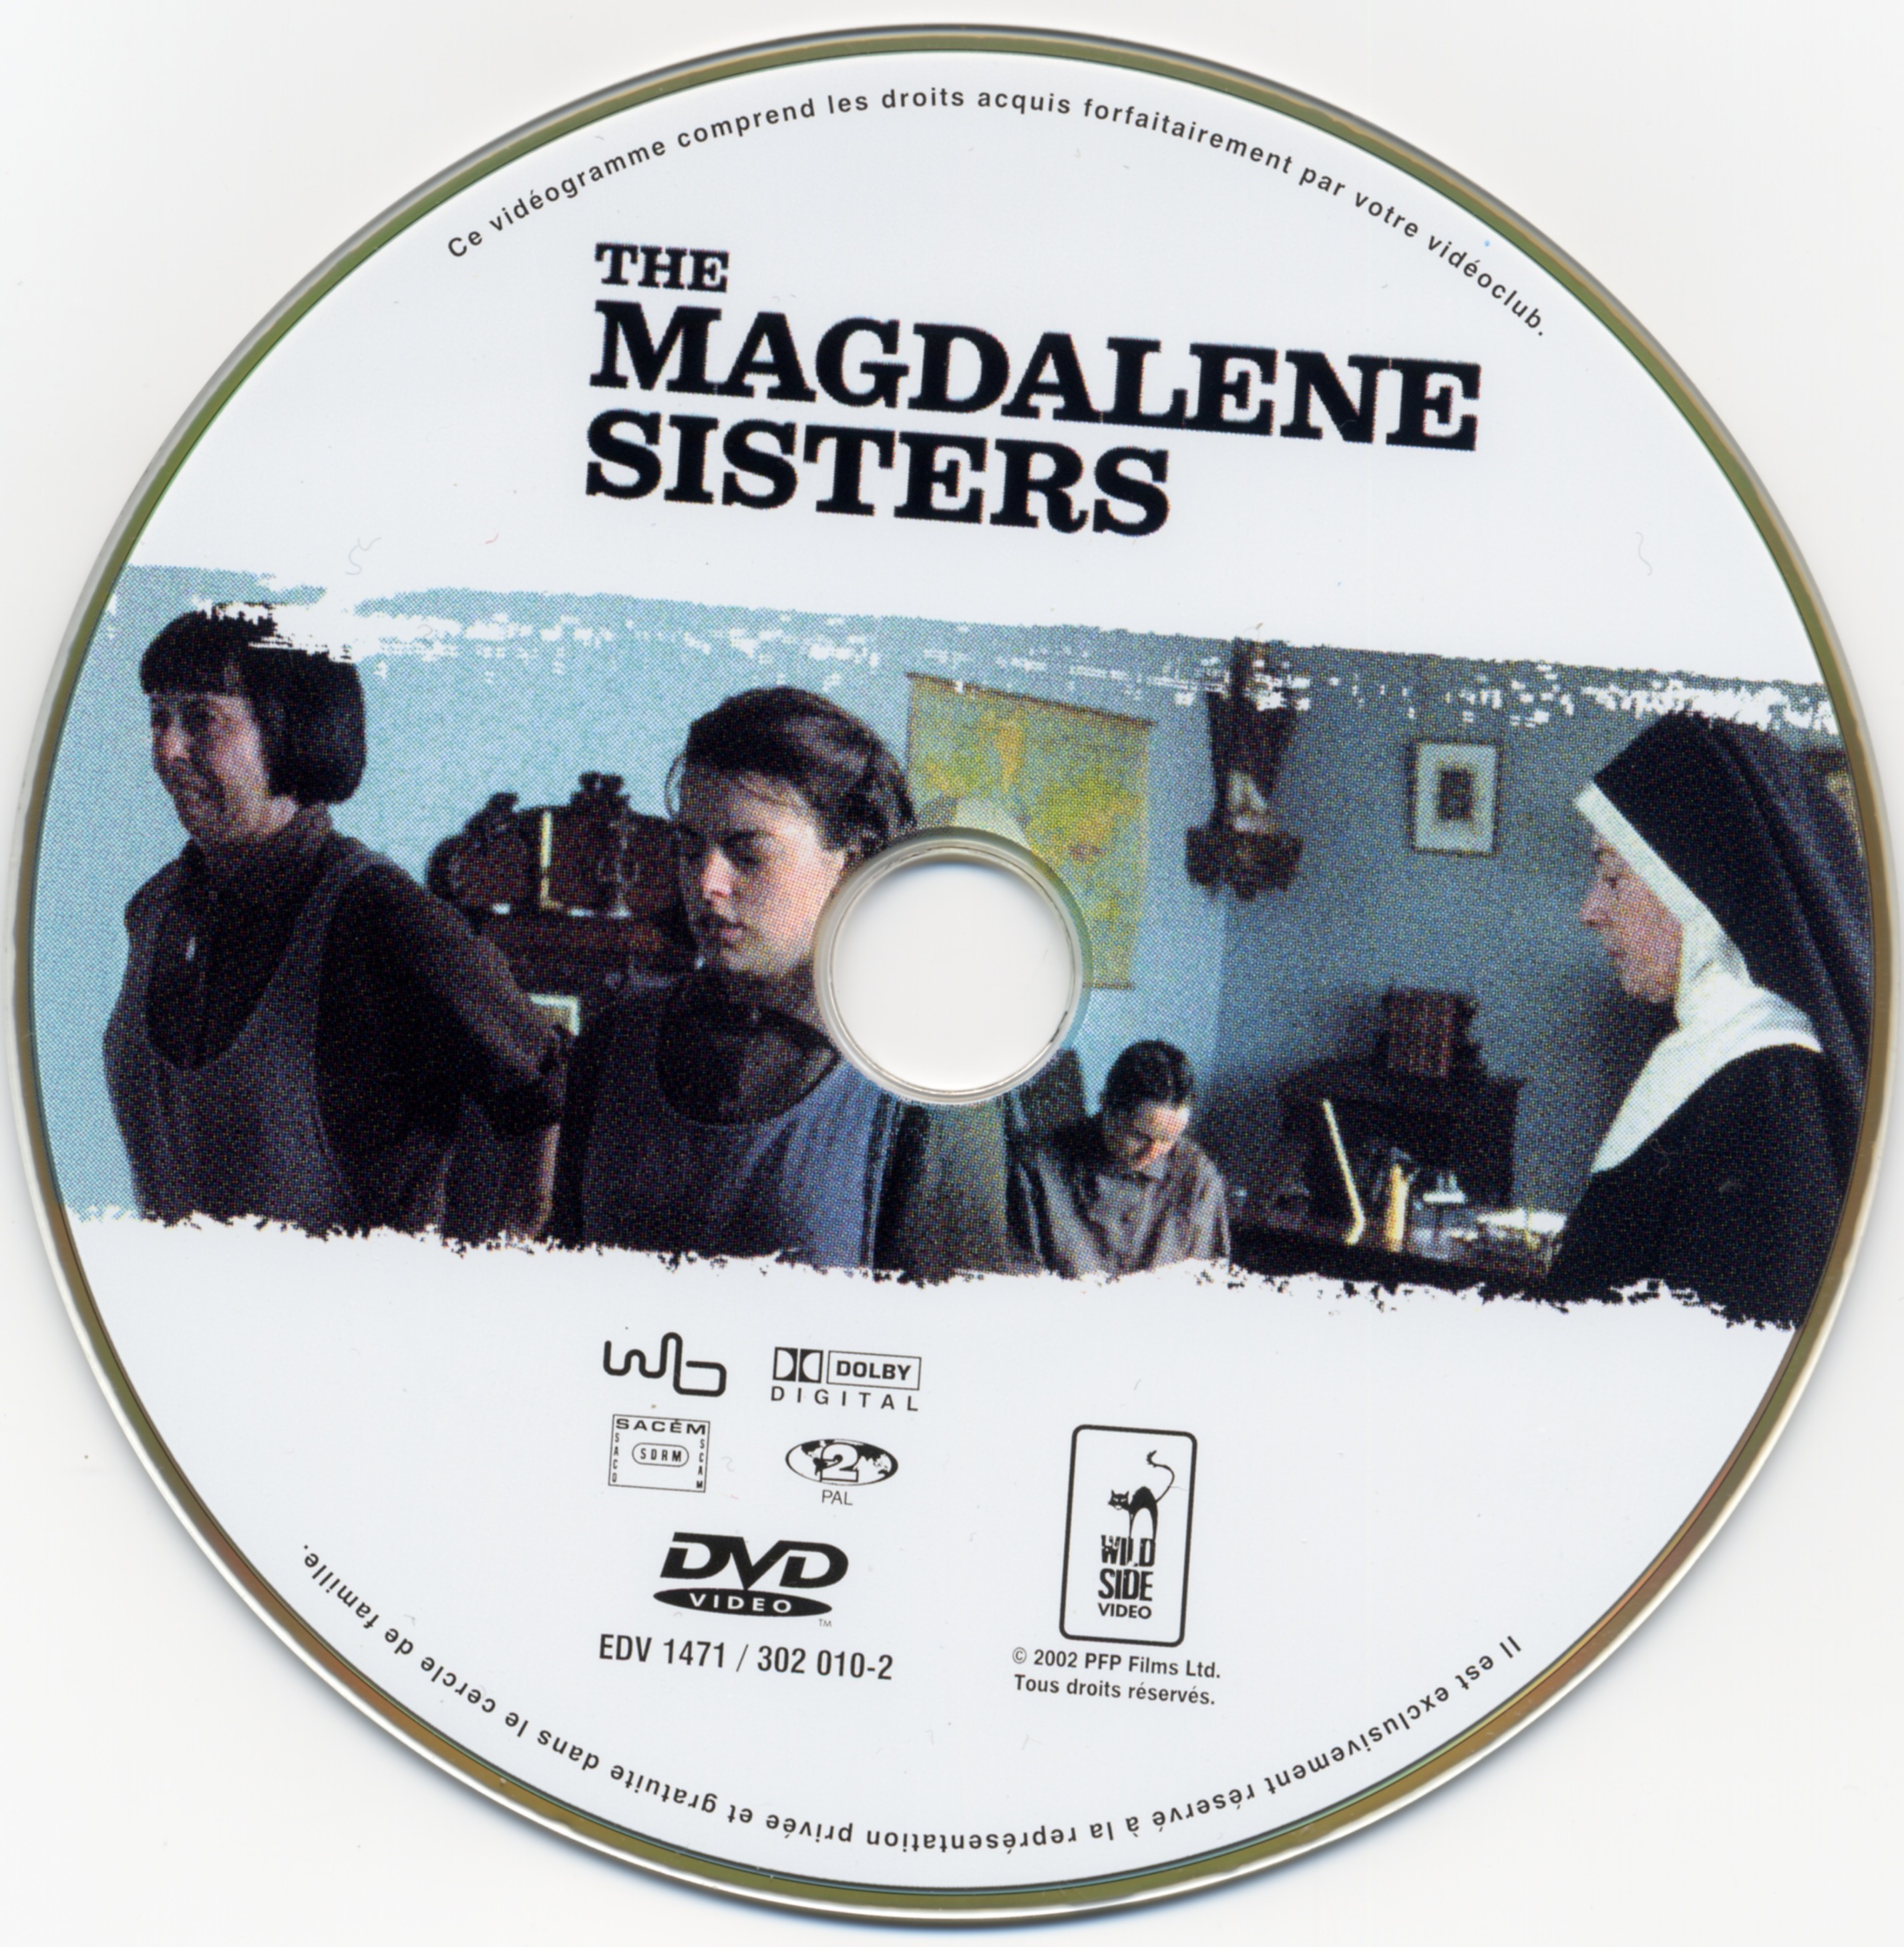 The magdalene sisters